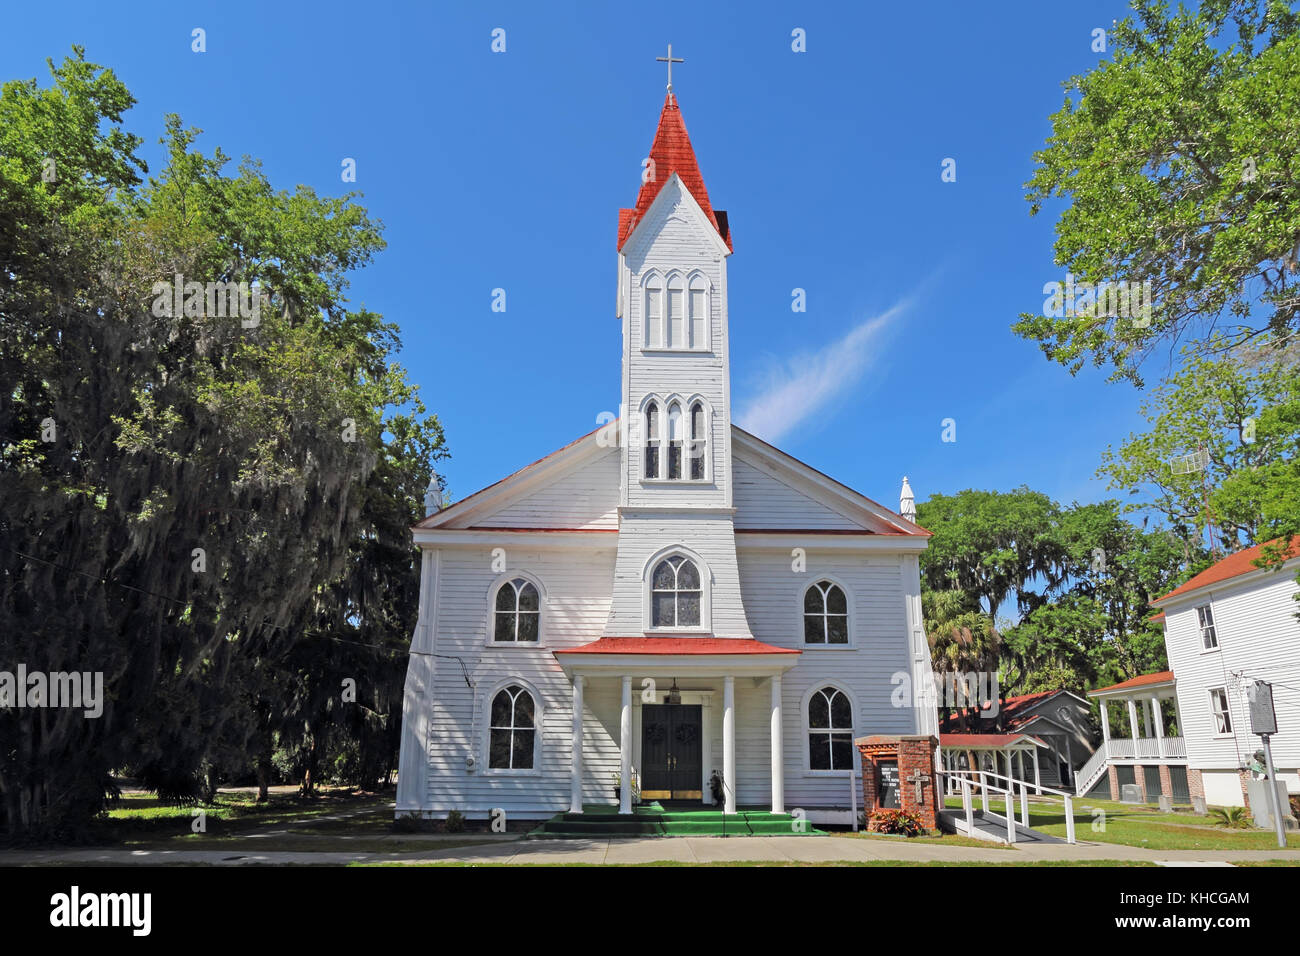 BEAUFORT, SOUTH CAROLINA - APRIL 16 2017: Tabernacle Baptist Church on Craven Street in the Historic District. The church was built by the African-Ame Stock Photo